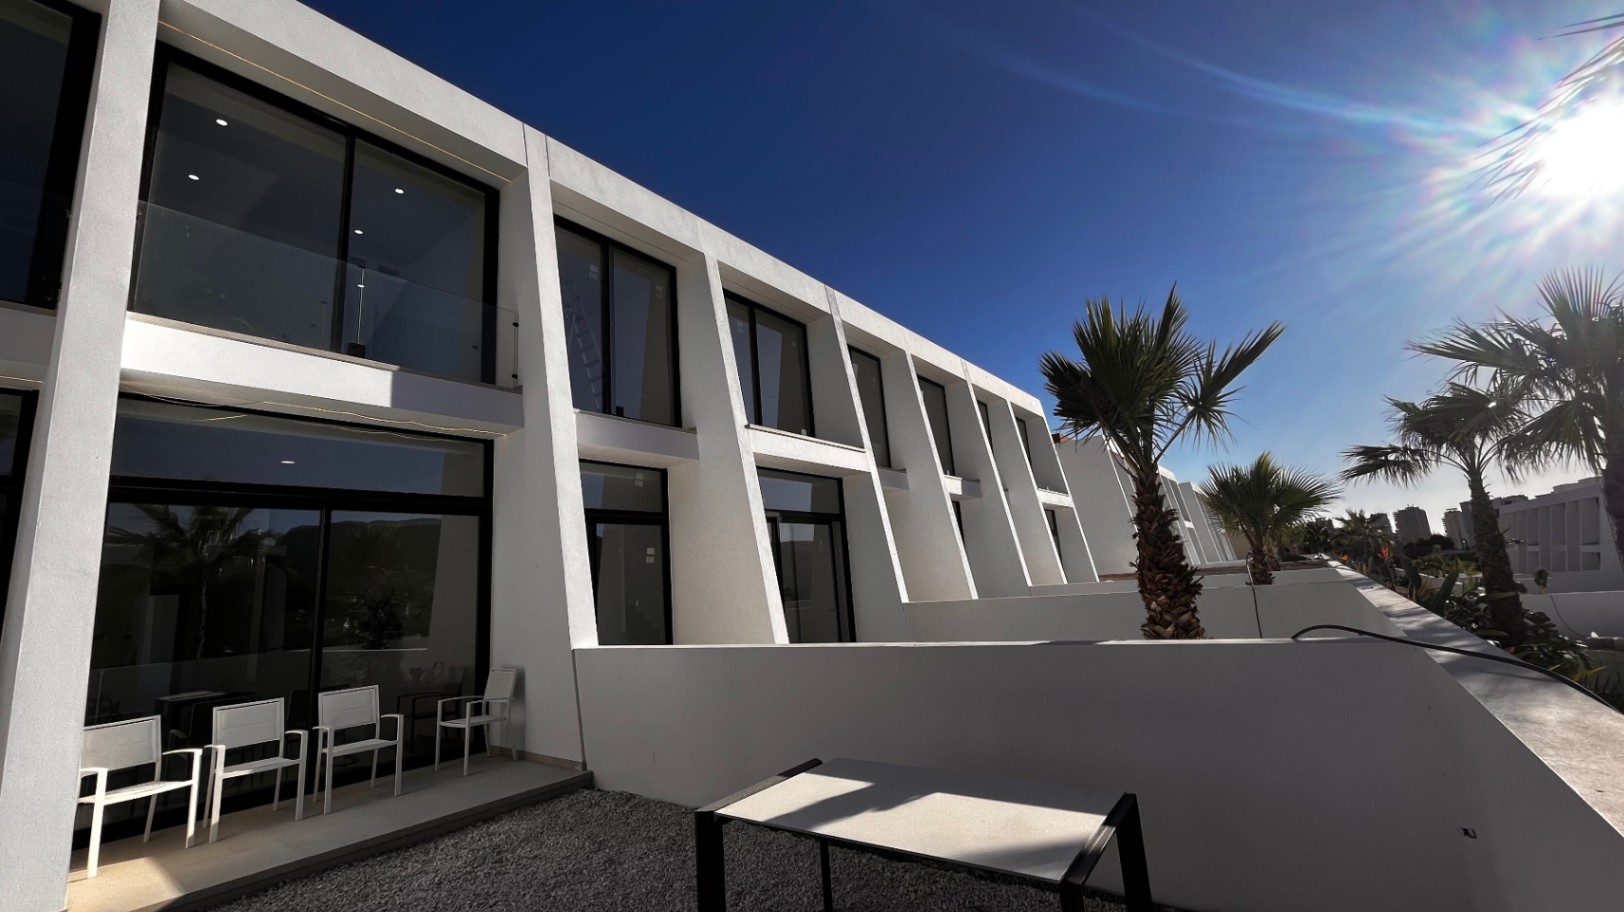 Fotogallerij - 3 - Exceptional homes in the Costa Blanca. Unparalleled Service. Exceptional properties in the Costa Blanca